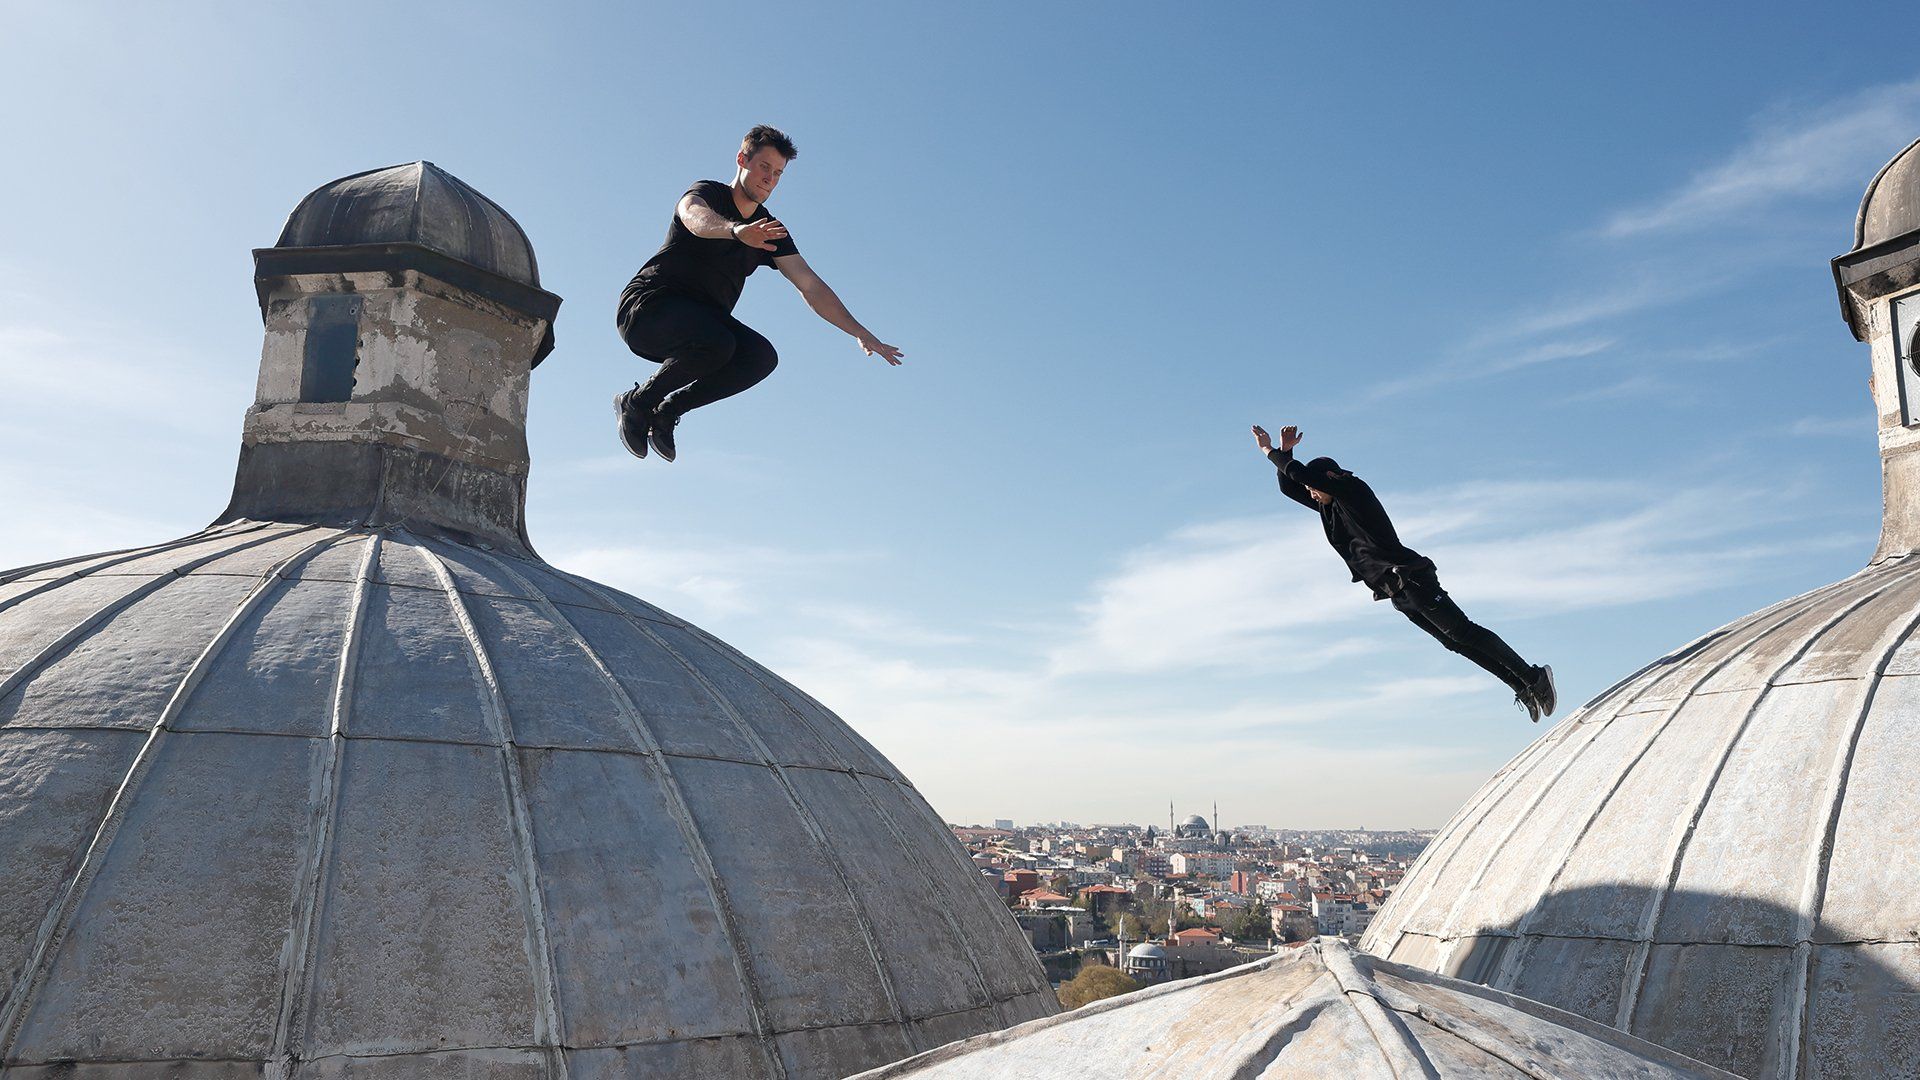 2 young men dressed in black leap around on a rooftop between Turkish domes with stone lanterns on top